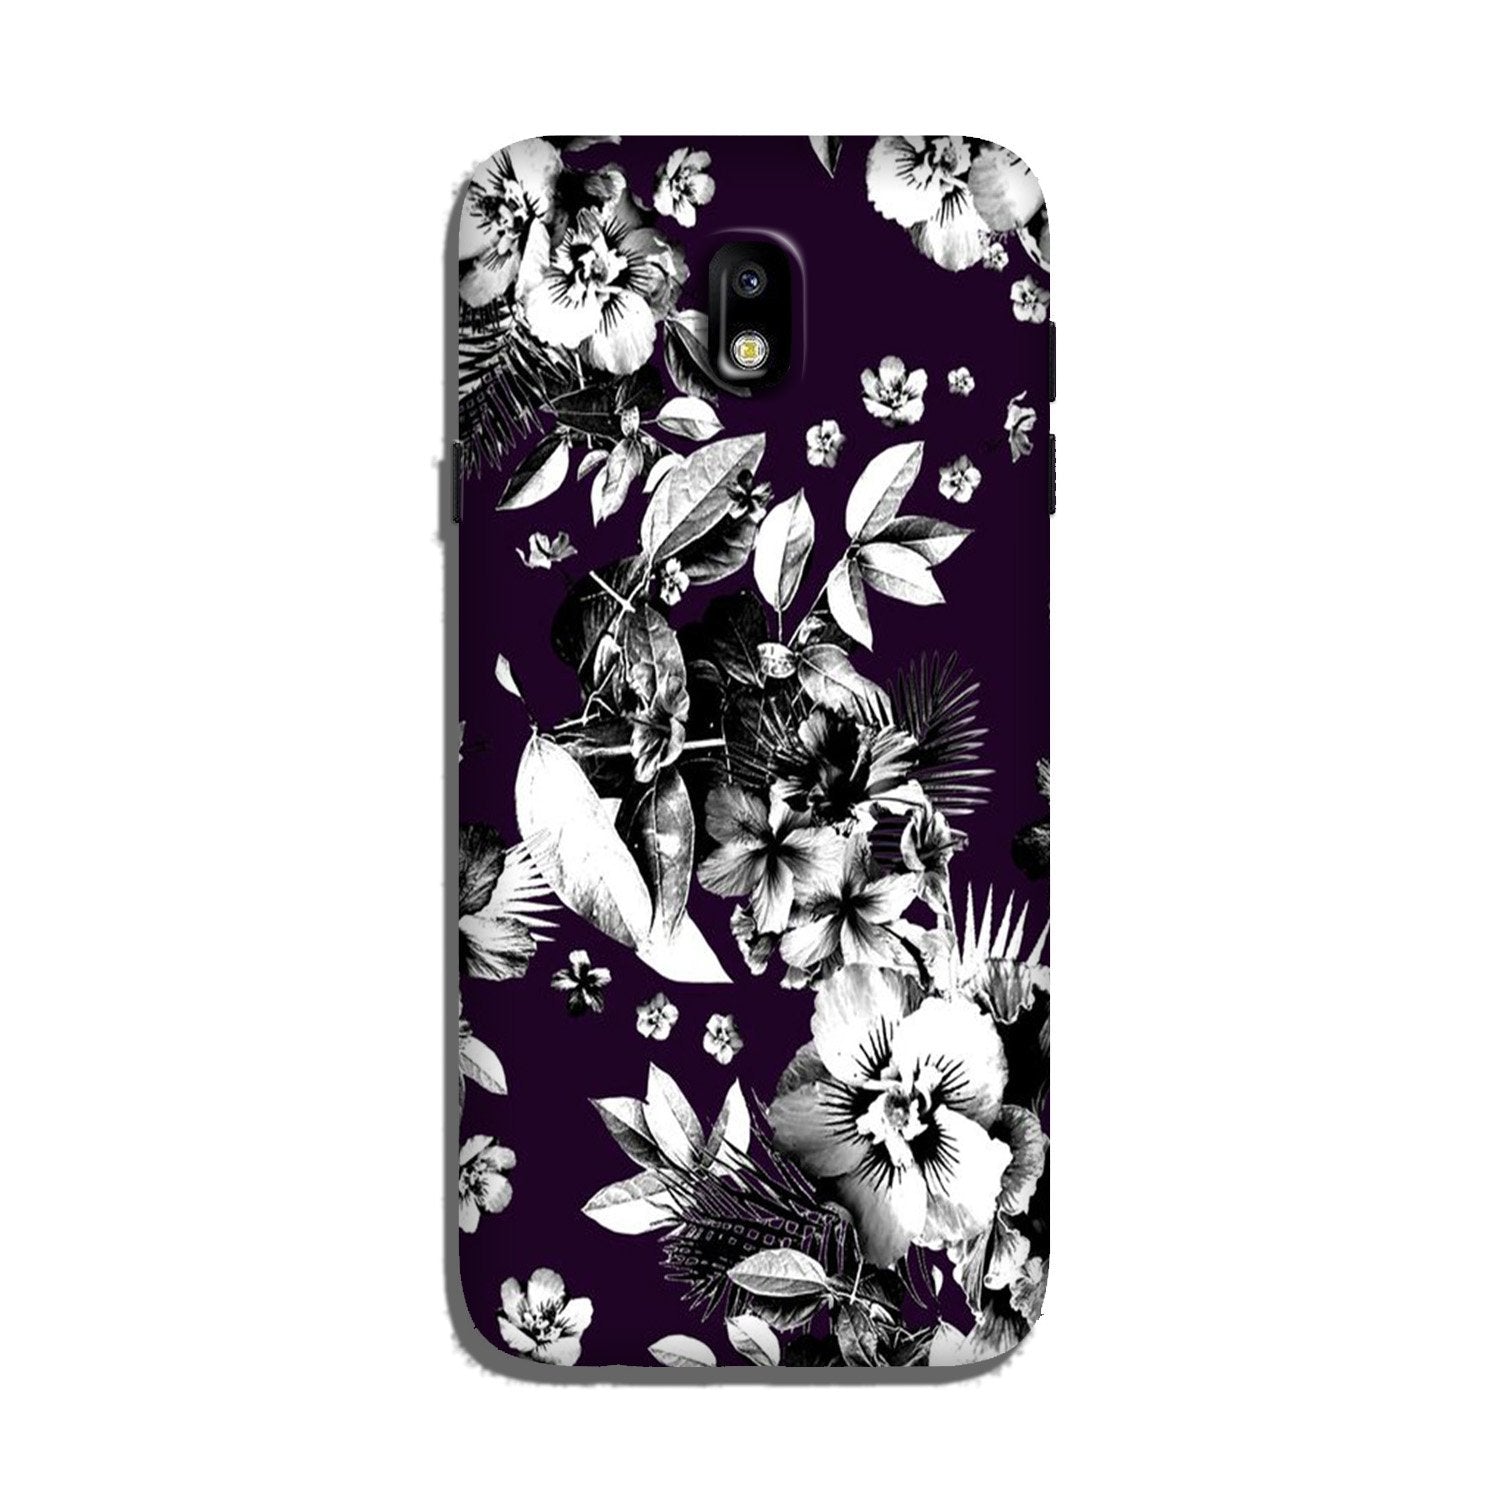 white flowers Case for Galaxy J5 Pro